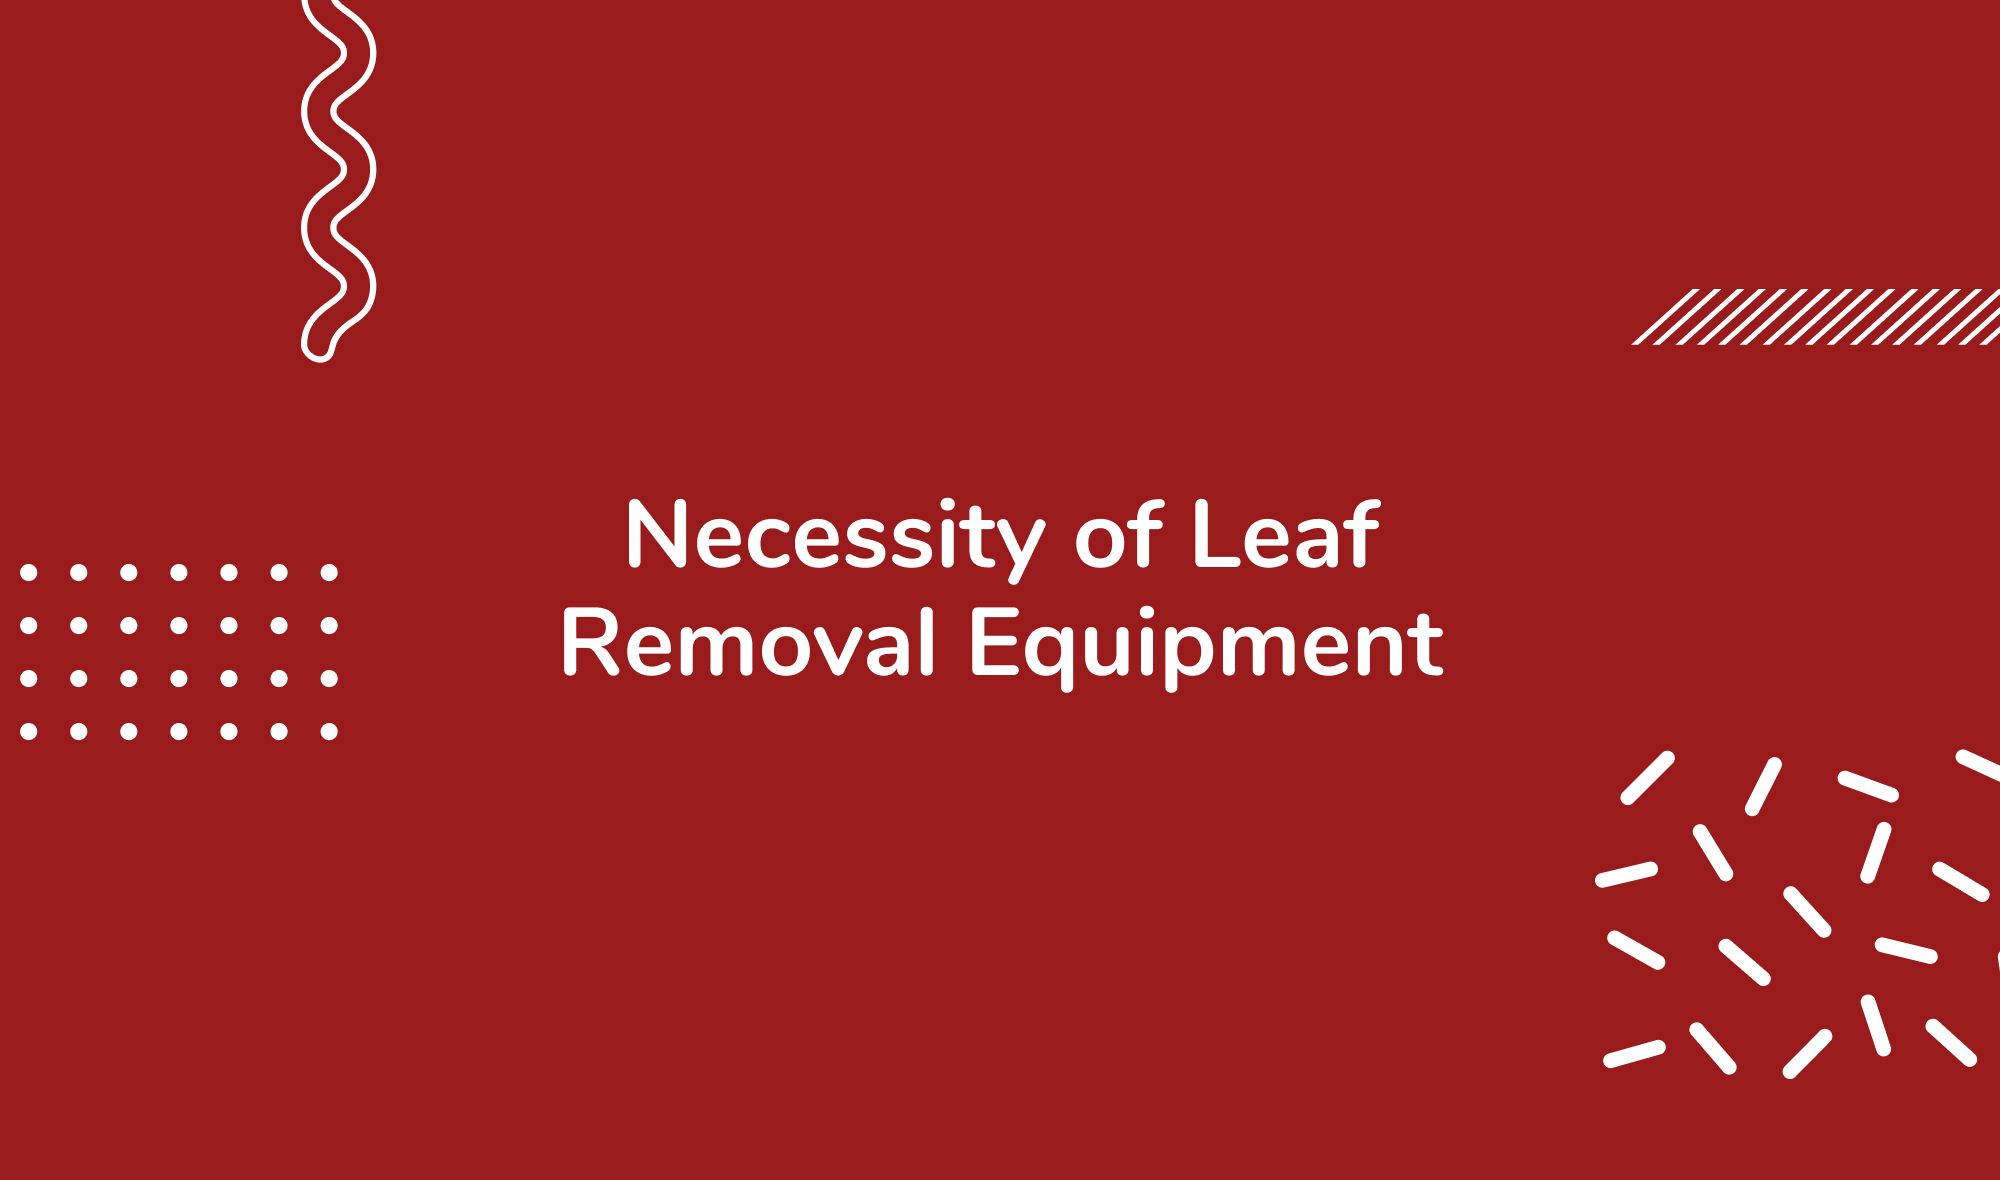 Necessity of Leaf Removal Equipment